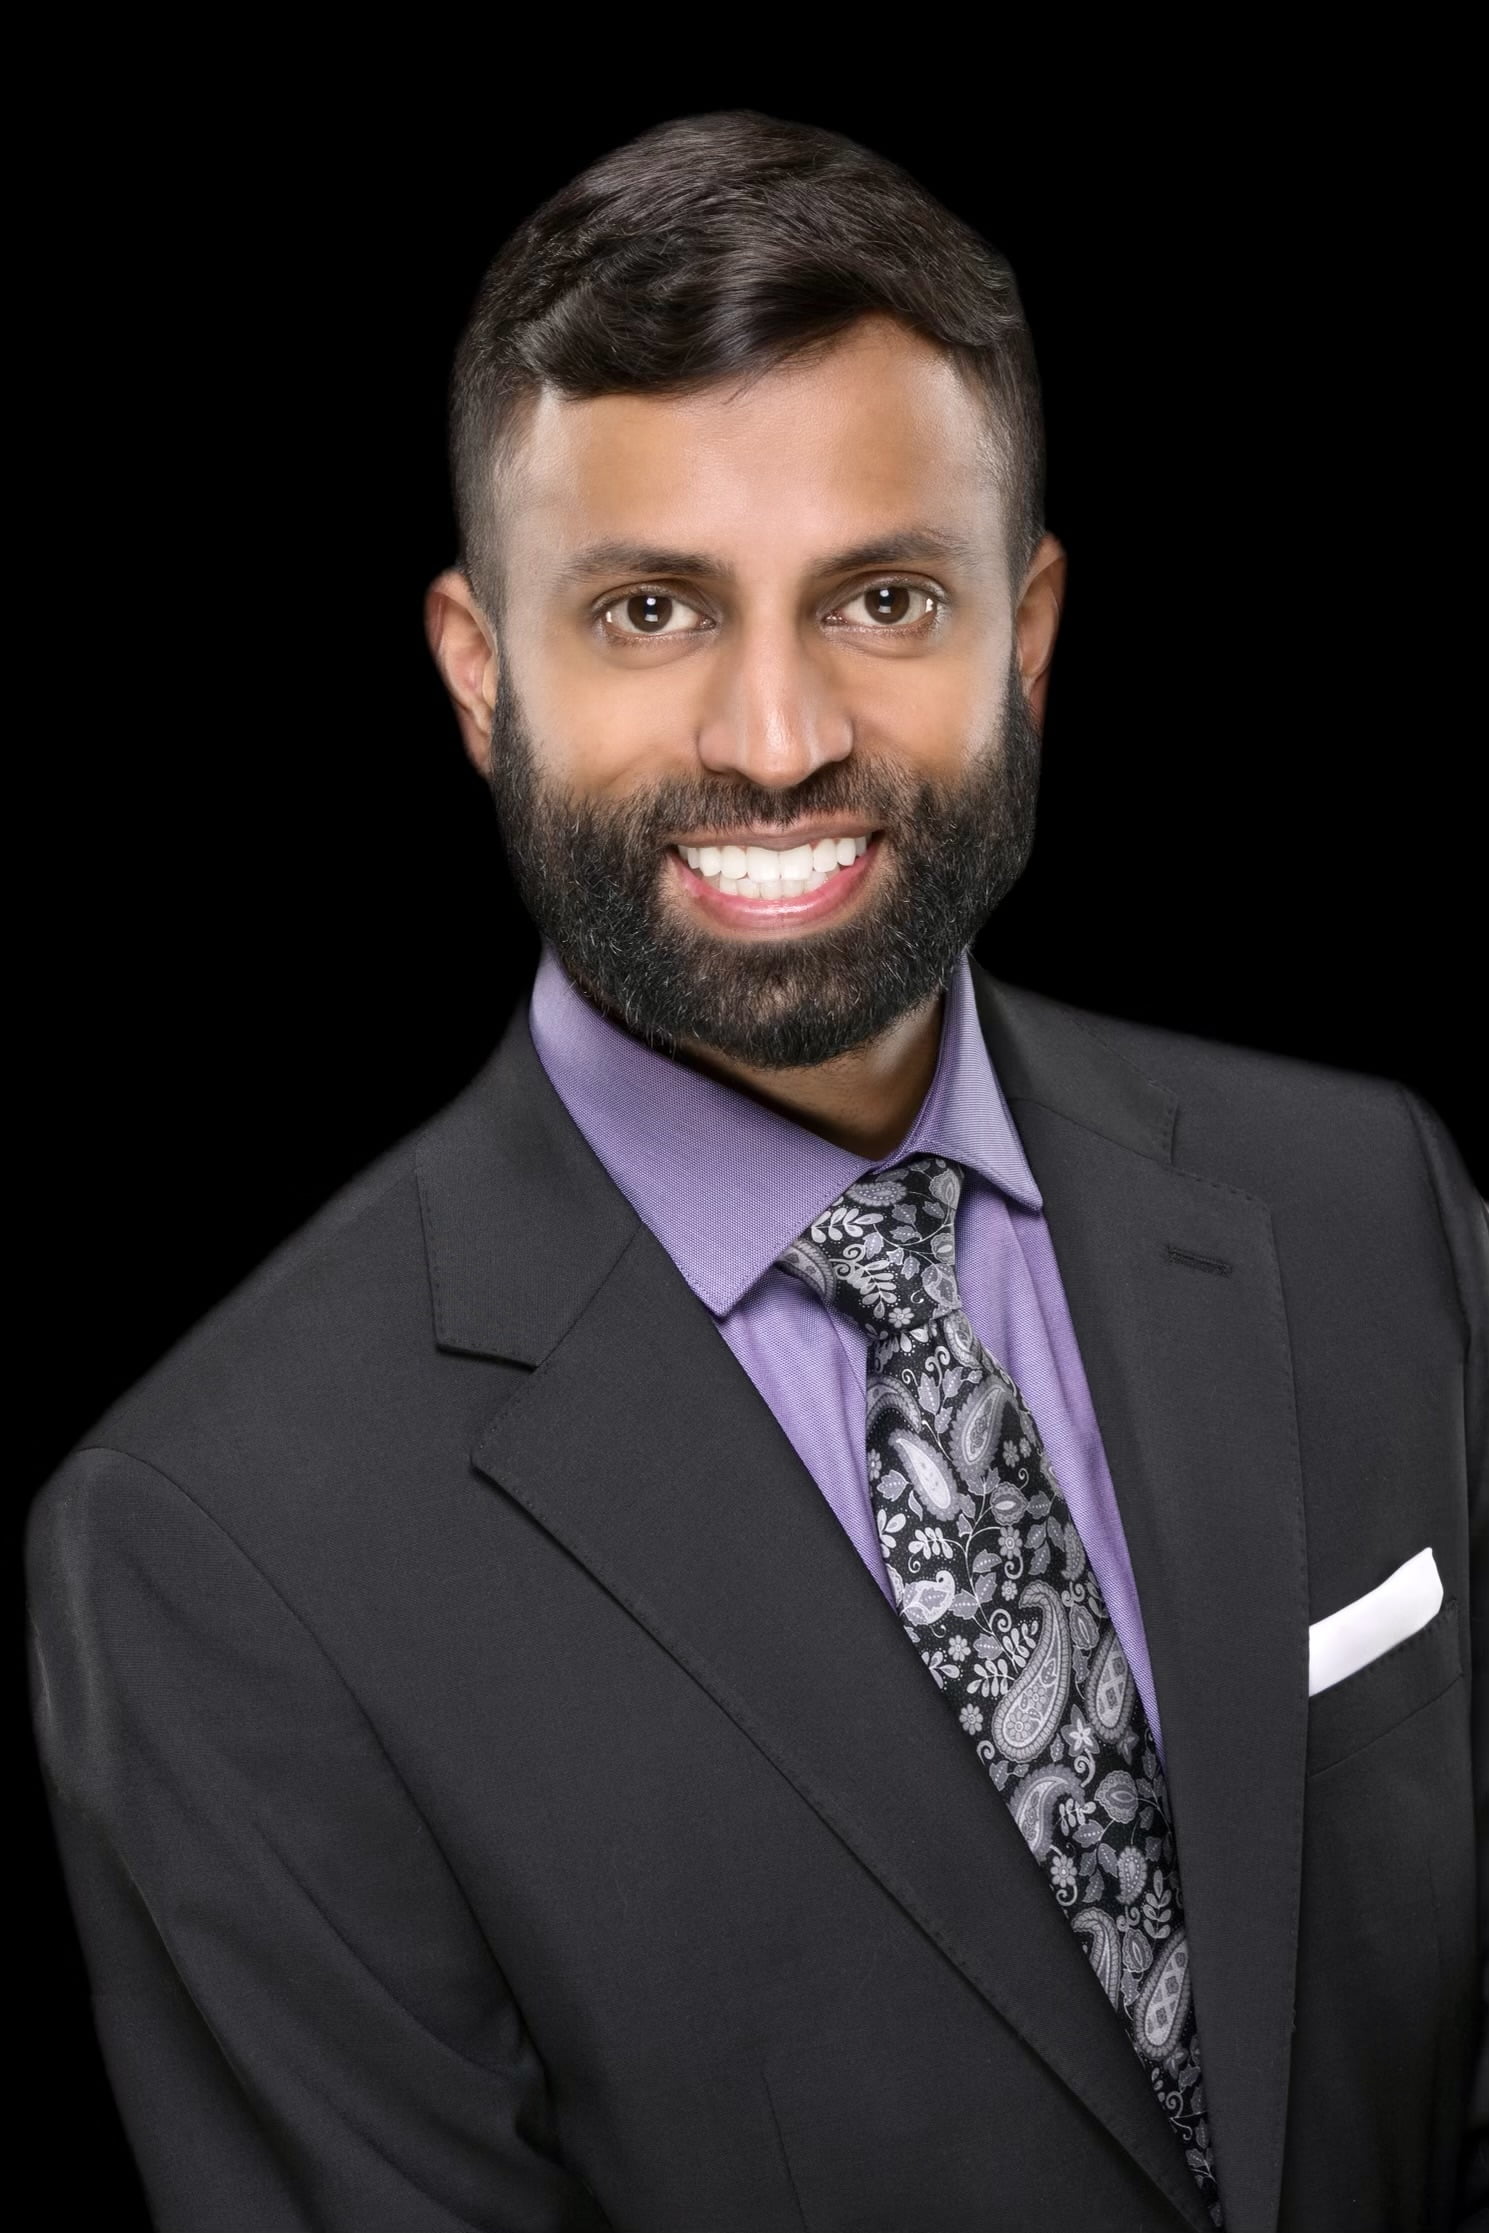 Dr. Rabahuddin Syed specializes in human performance and anti-aging, including HRT, weight loss, and regenerative medicine.